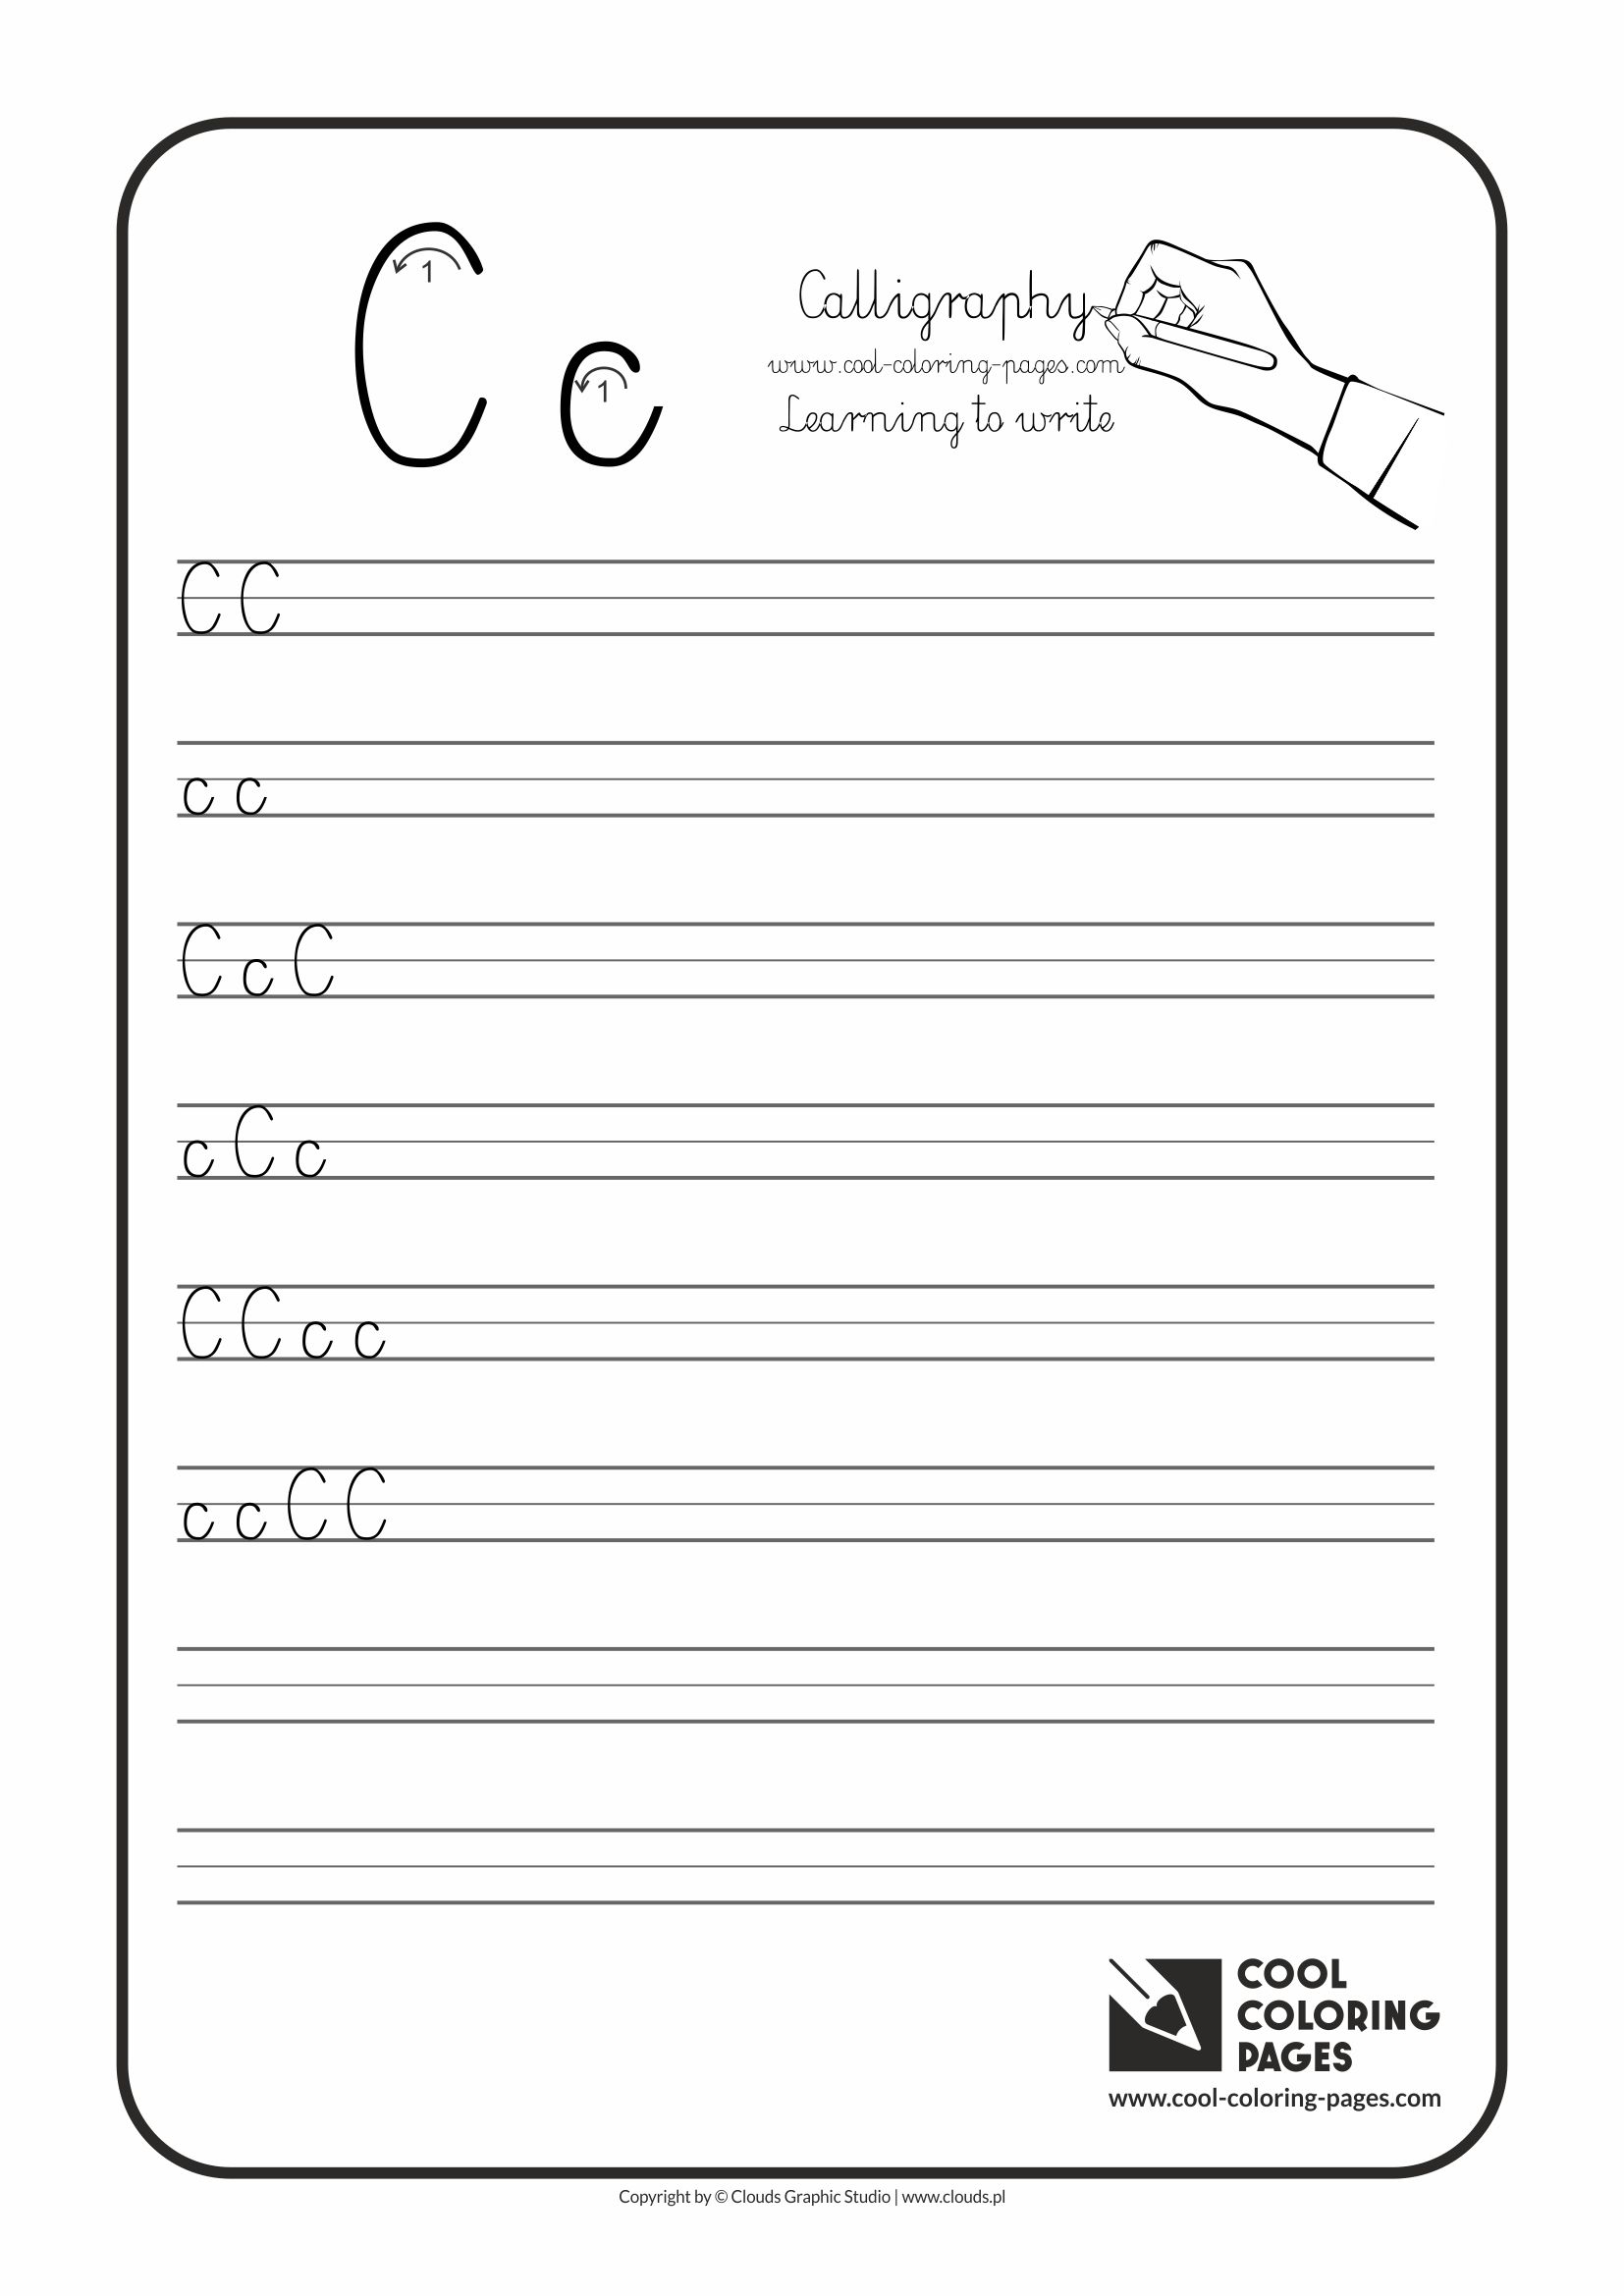 Cool Coloring Pages / Calligraphy / Letter C - Handwriting for kids / Worksheets